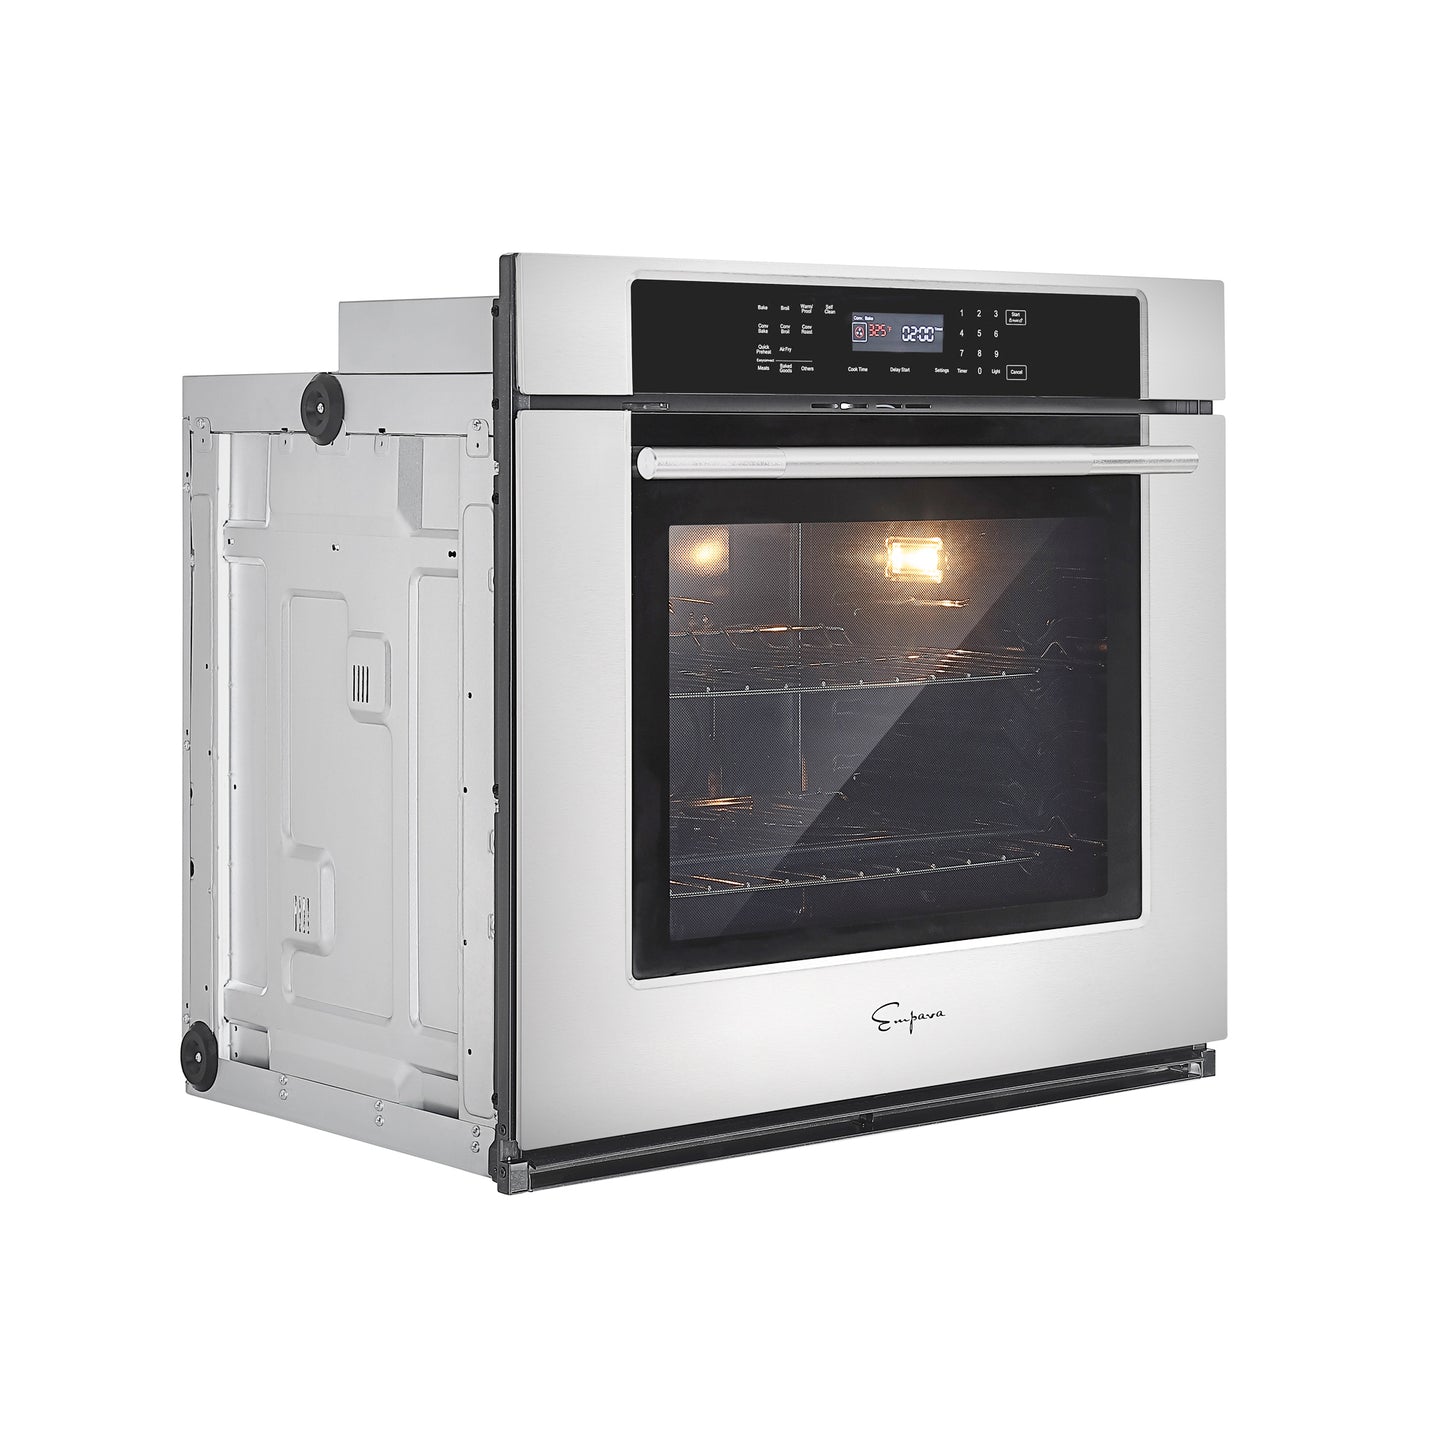 Empava 30" Electric Single Wall Oven 30WO04